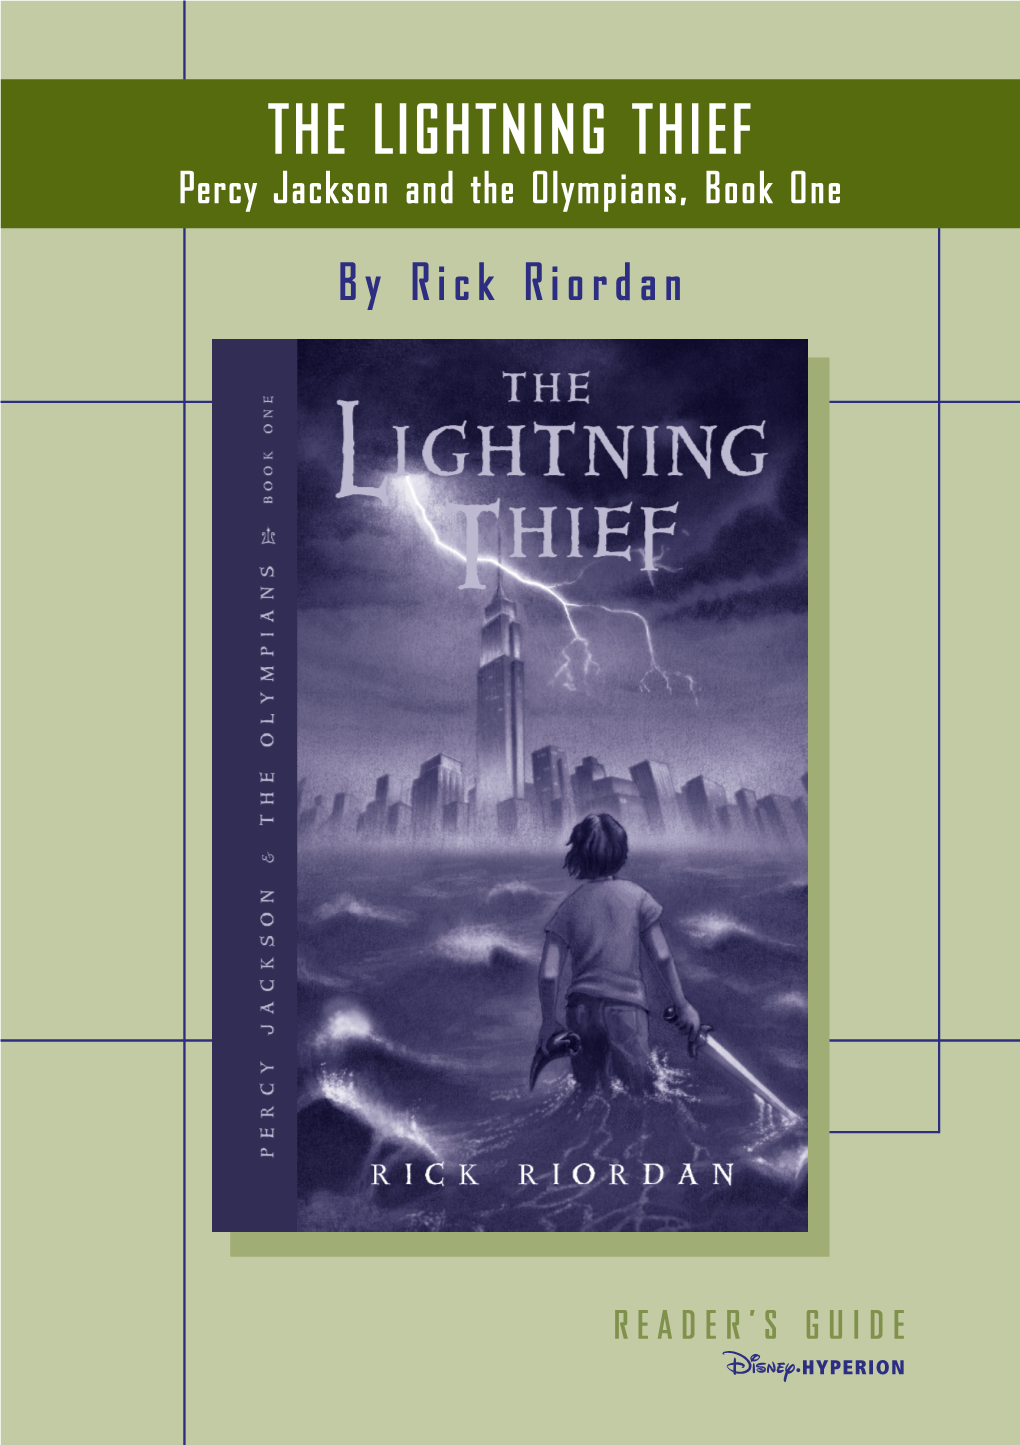 THE LIGHTNING THIEF Percy Jackson and the Olympians, Book One by Rick Riordan